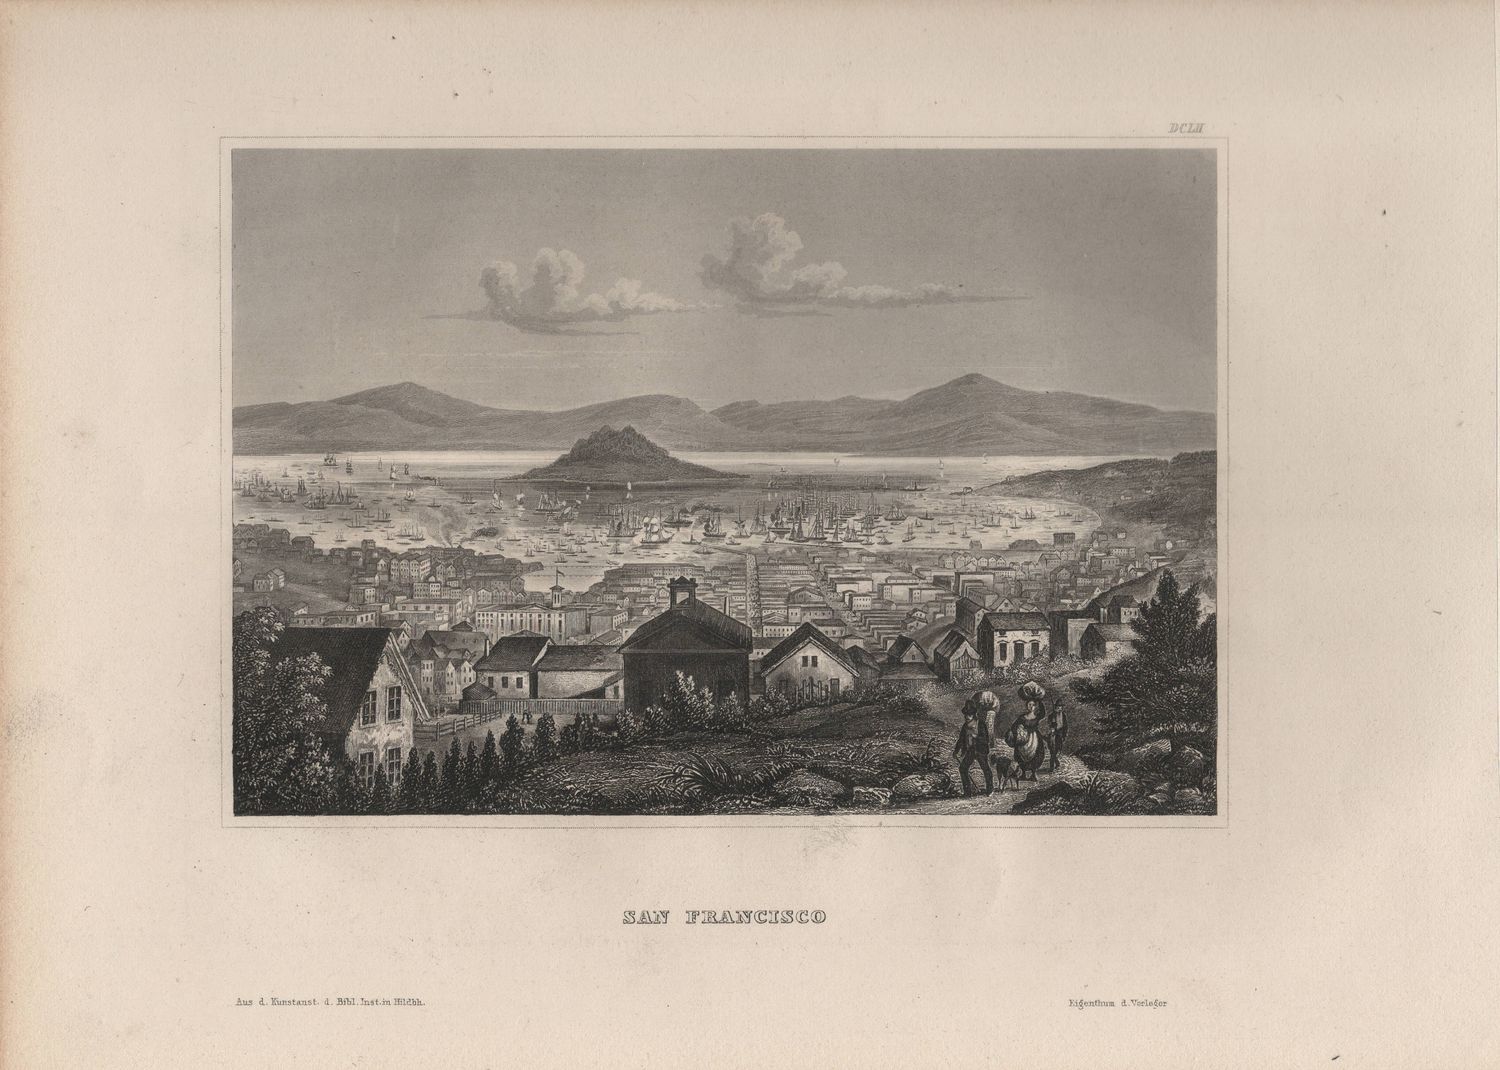 1854 View of San Francisco by Myers in Steel engraving